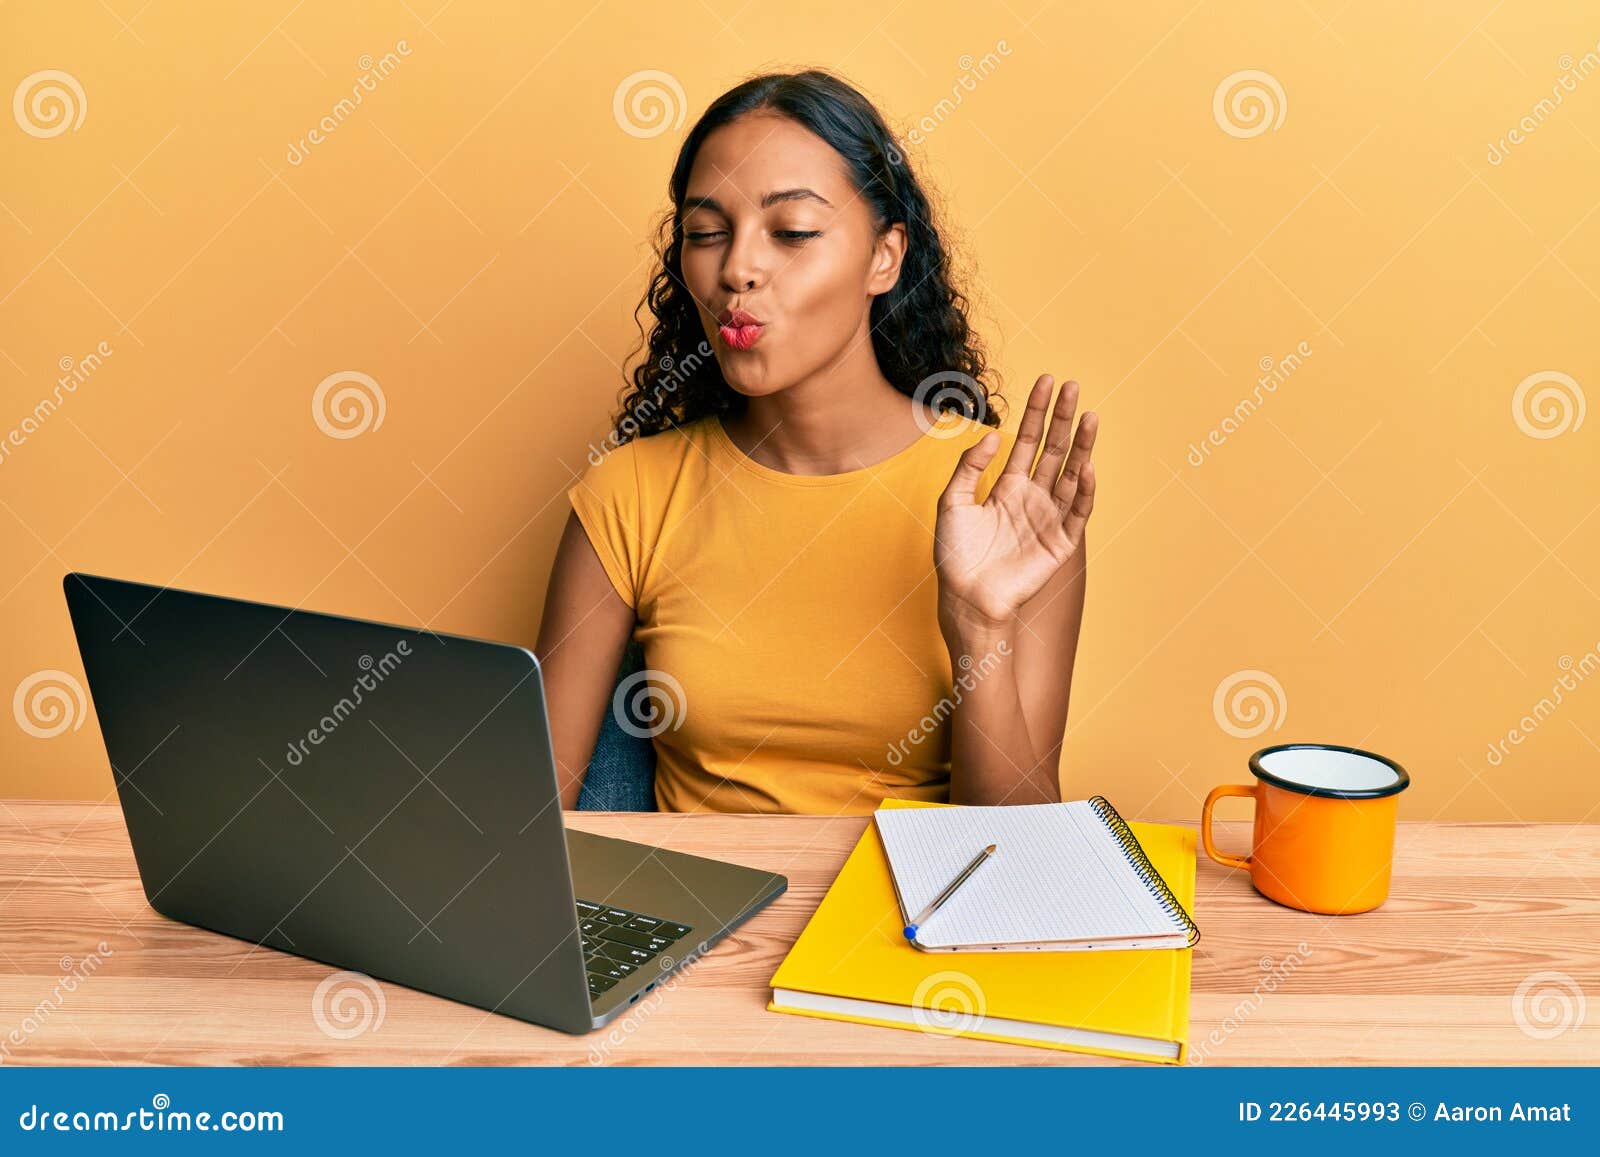 N America Sexy Sexy Videos - Young African American Girl Doing Video Call Waving To Laptop Looking at  the Camera Blowing a Kiss Being Lovely and Stock Image - Image of kisses,  emotion: 226445993